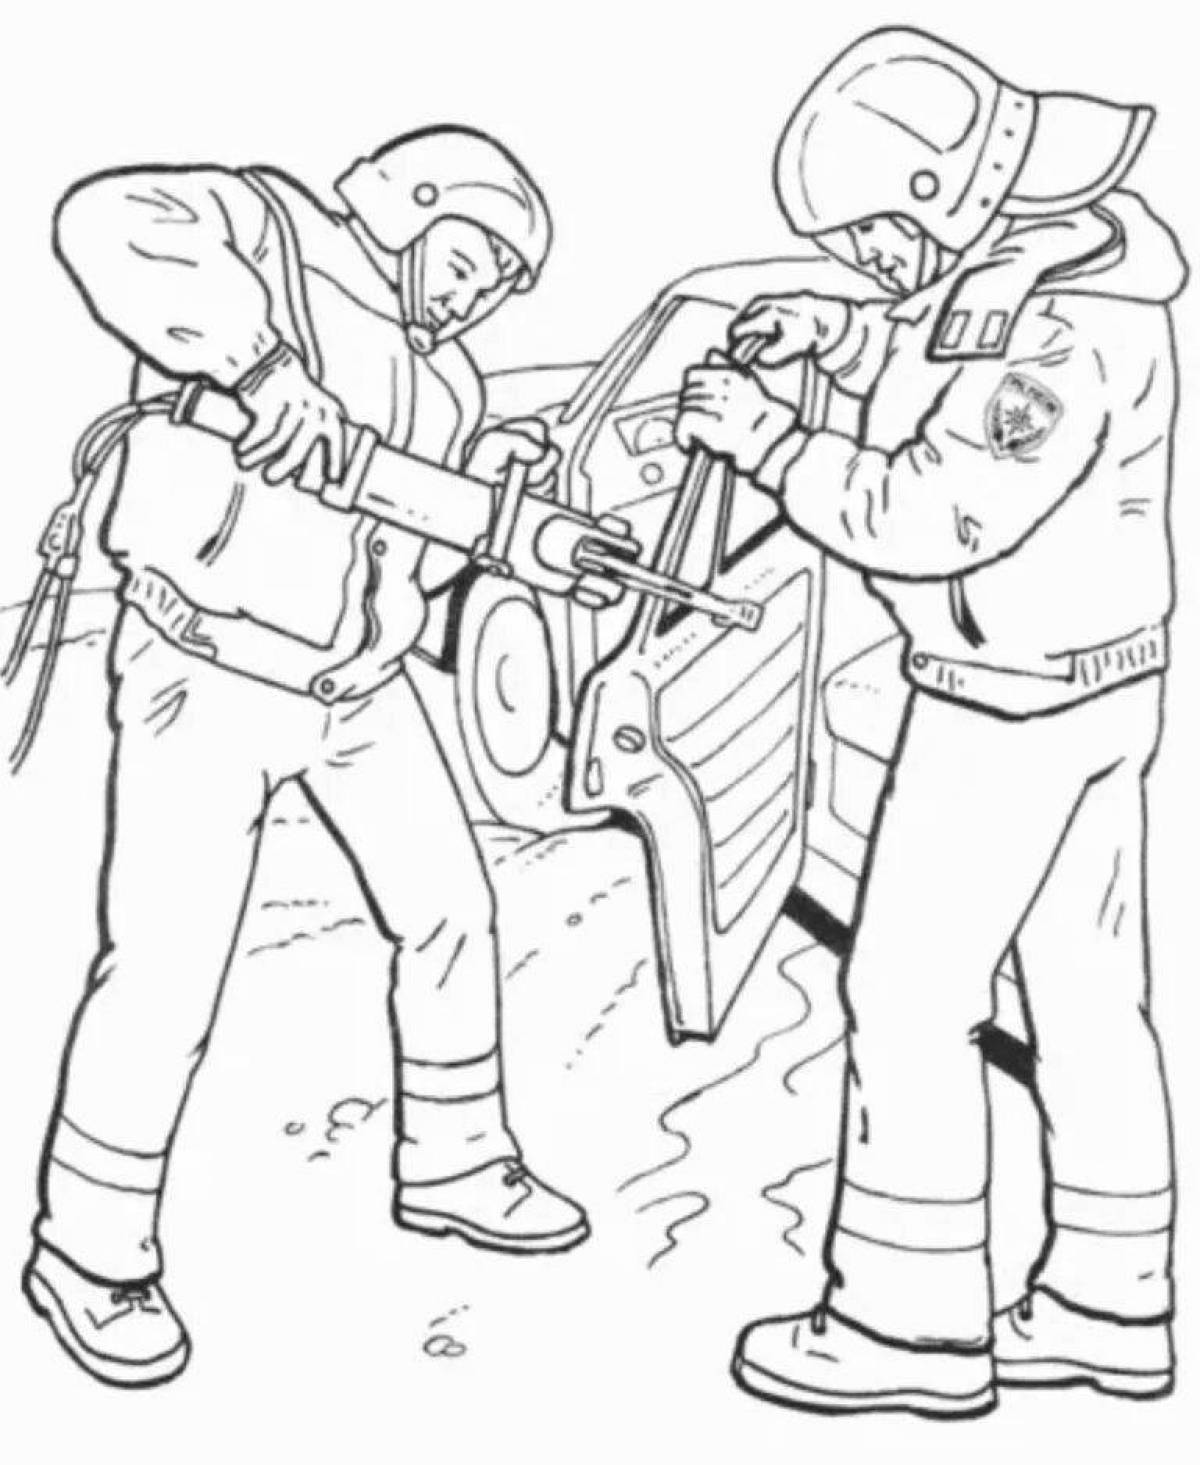 Great coloring book who protects us